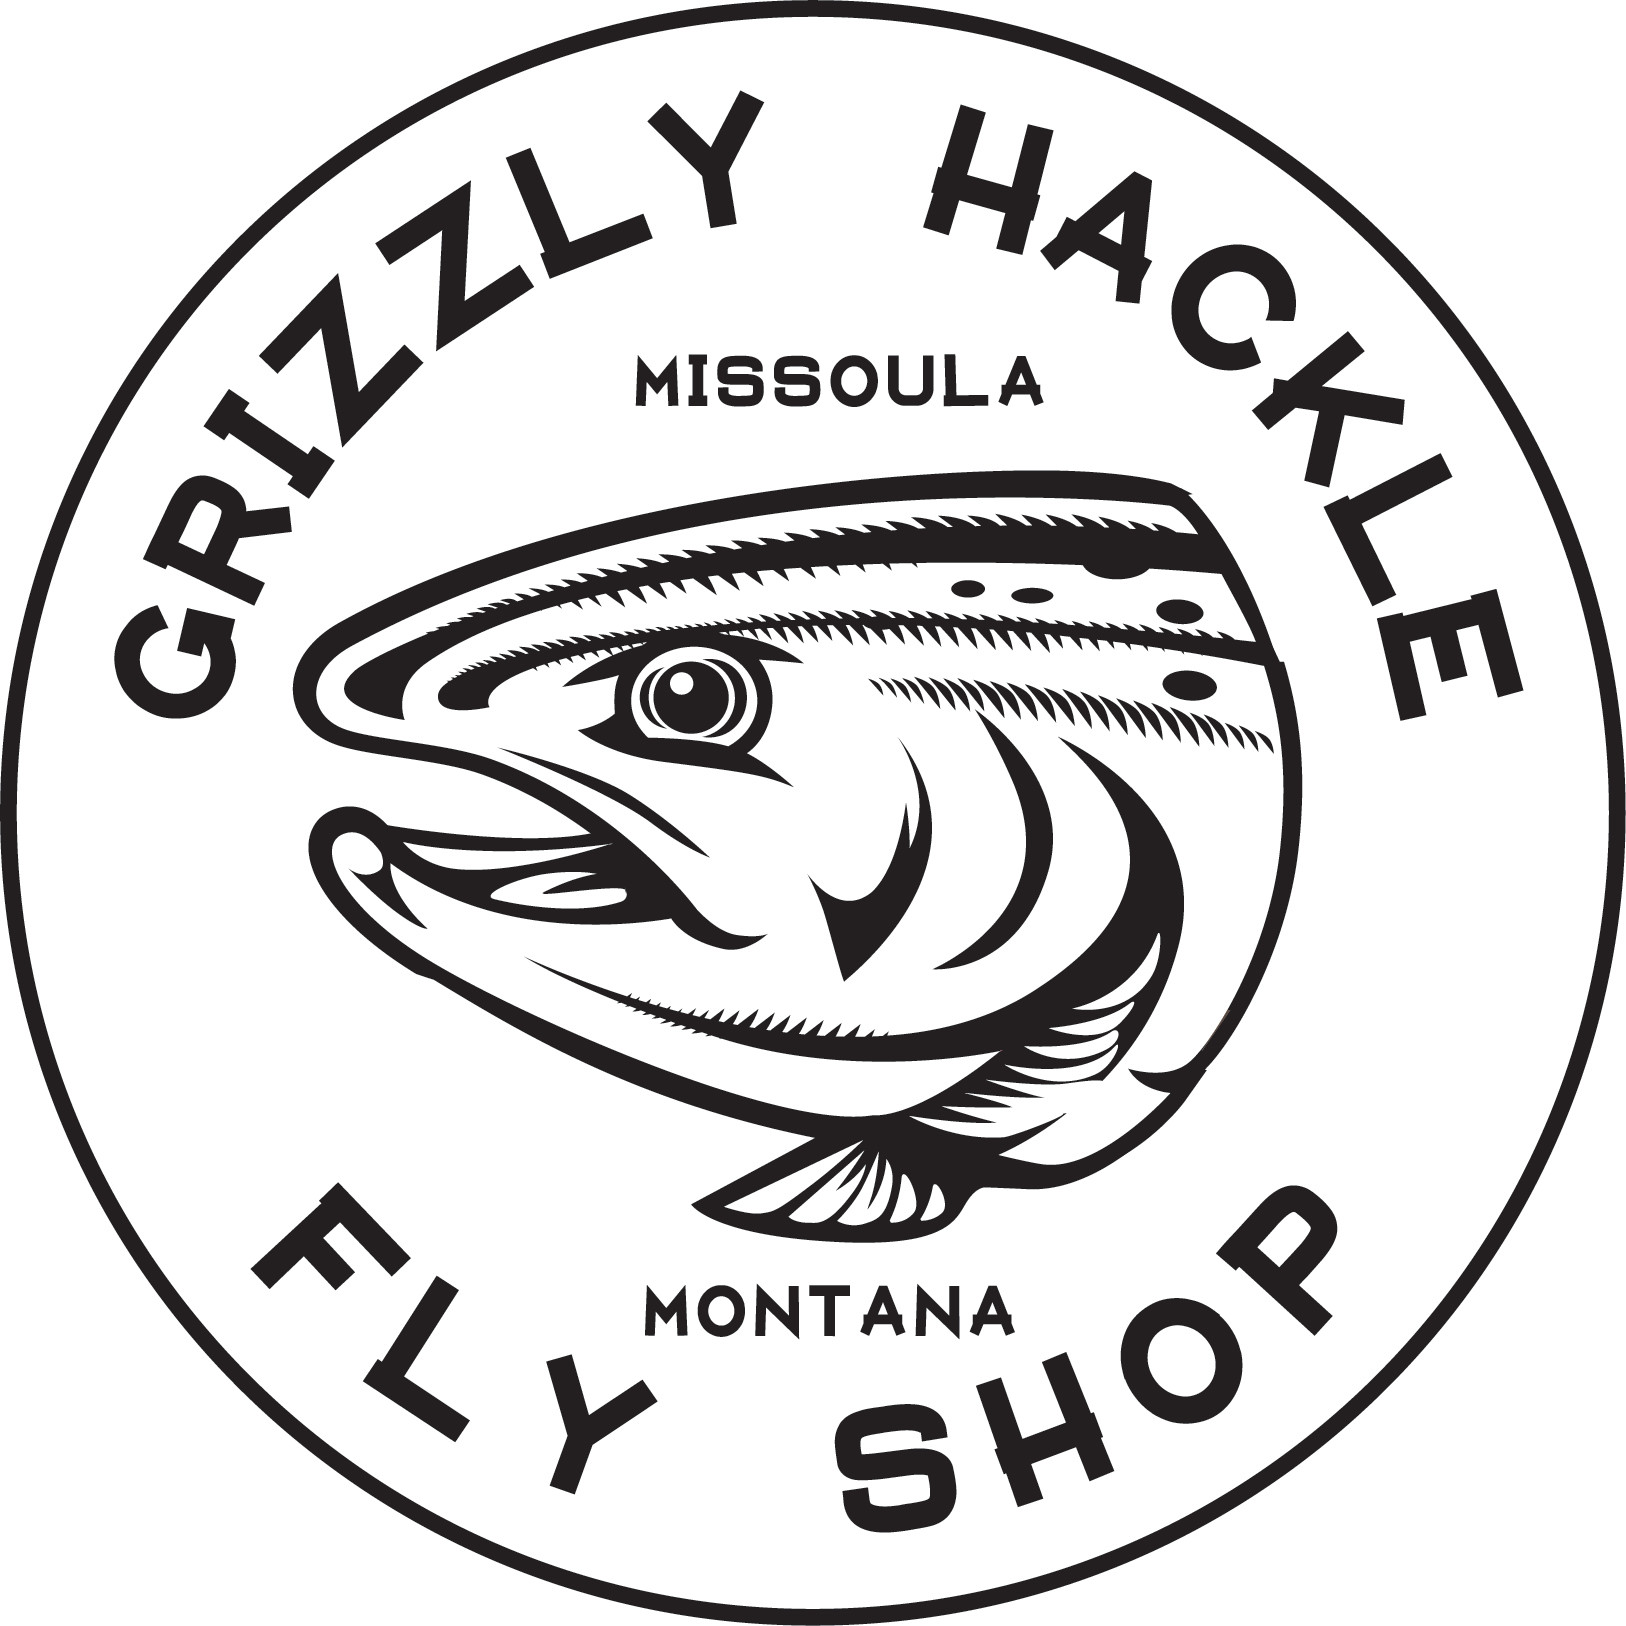 Tying Fishing Flies With Henry Hoffman, Grizzly Hackle Feathers - Bloomberg